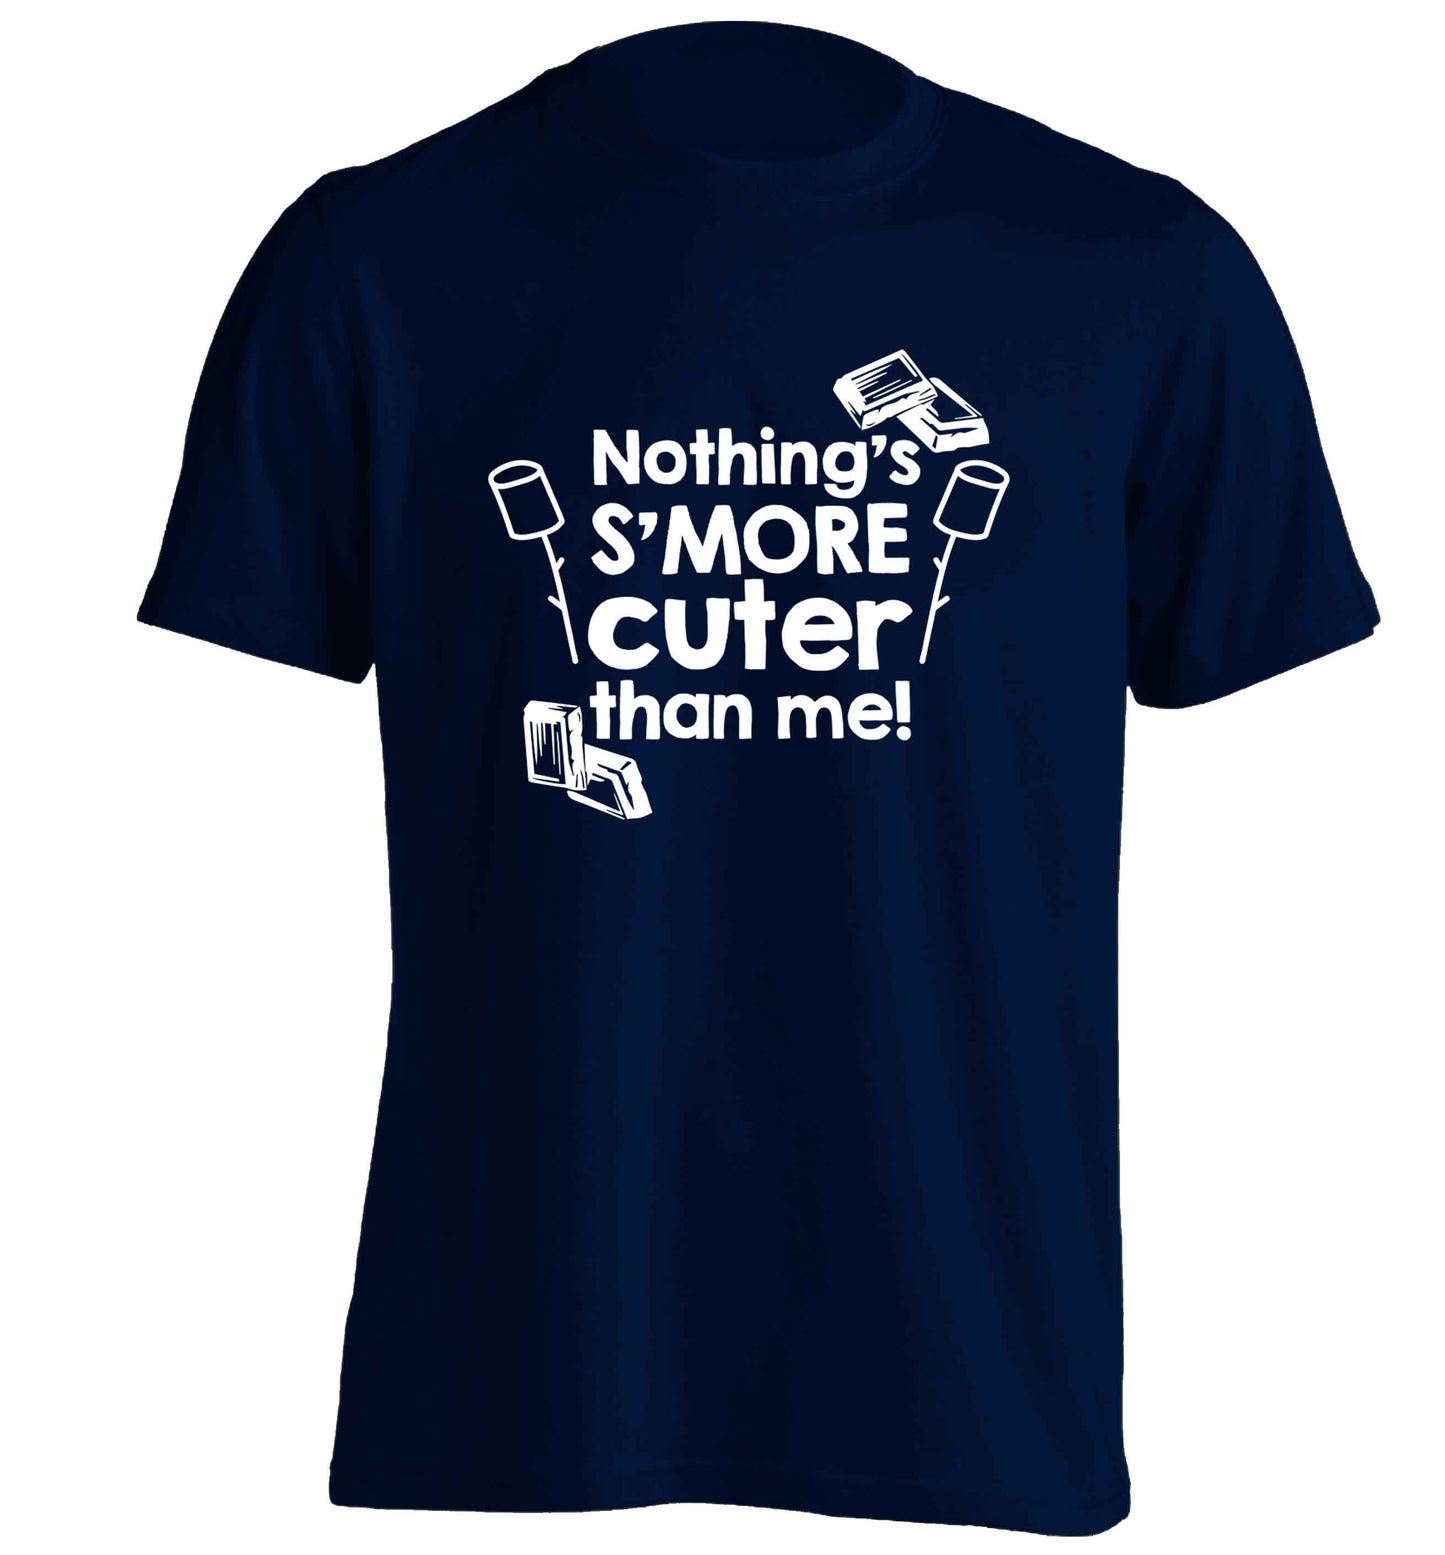 Nothing's s'more cuter than me! adults unisex navy Tshirt 2XL